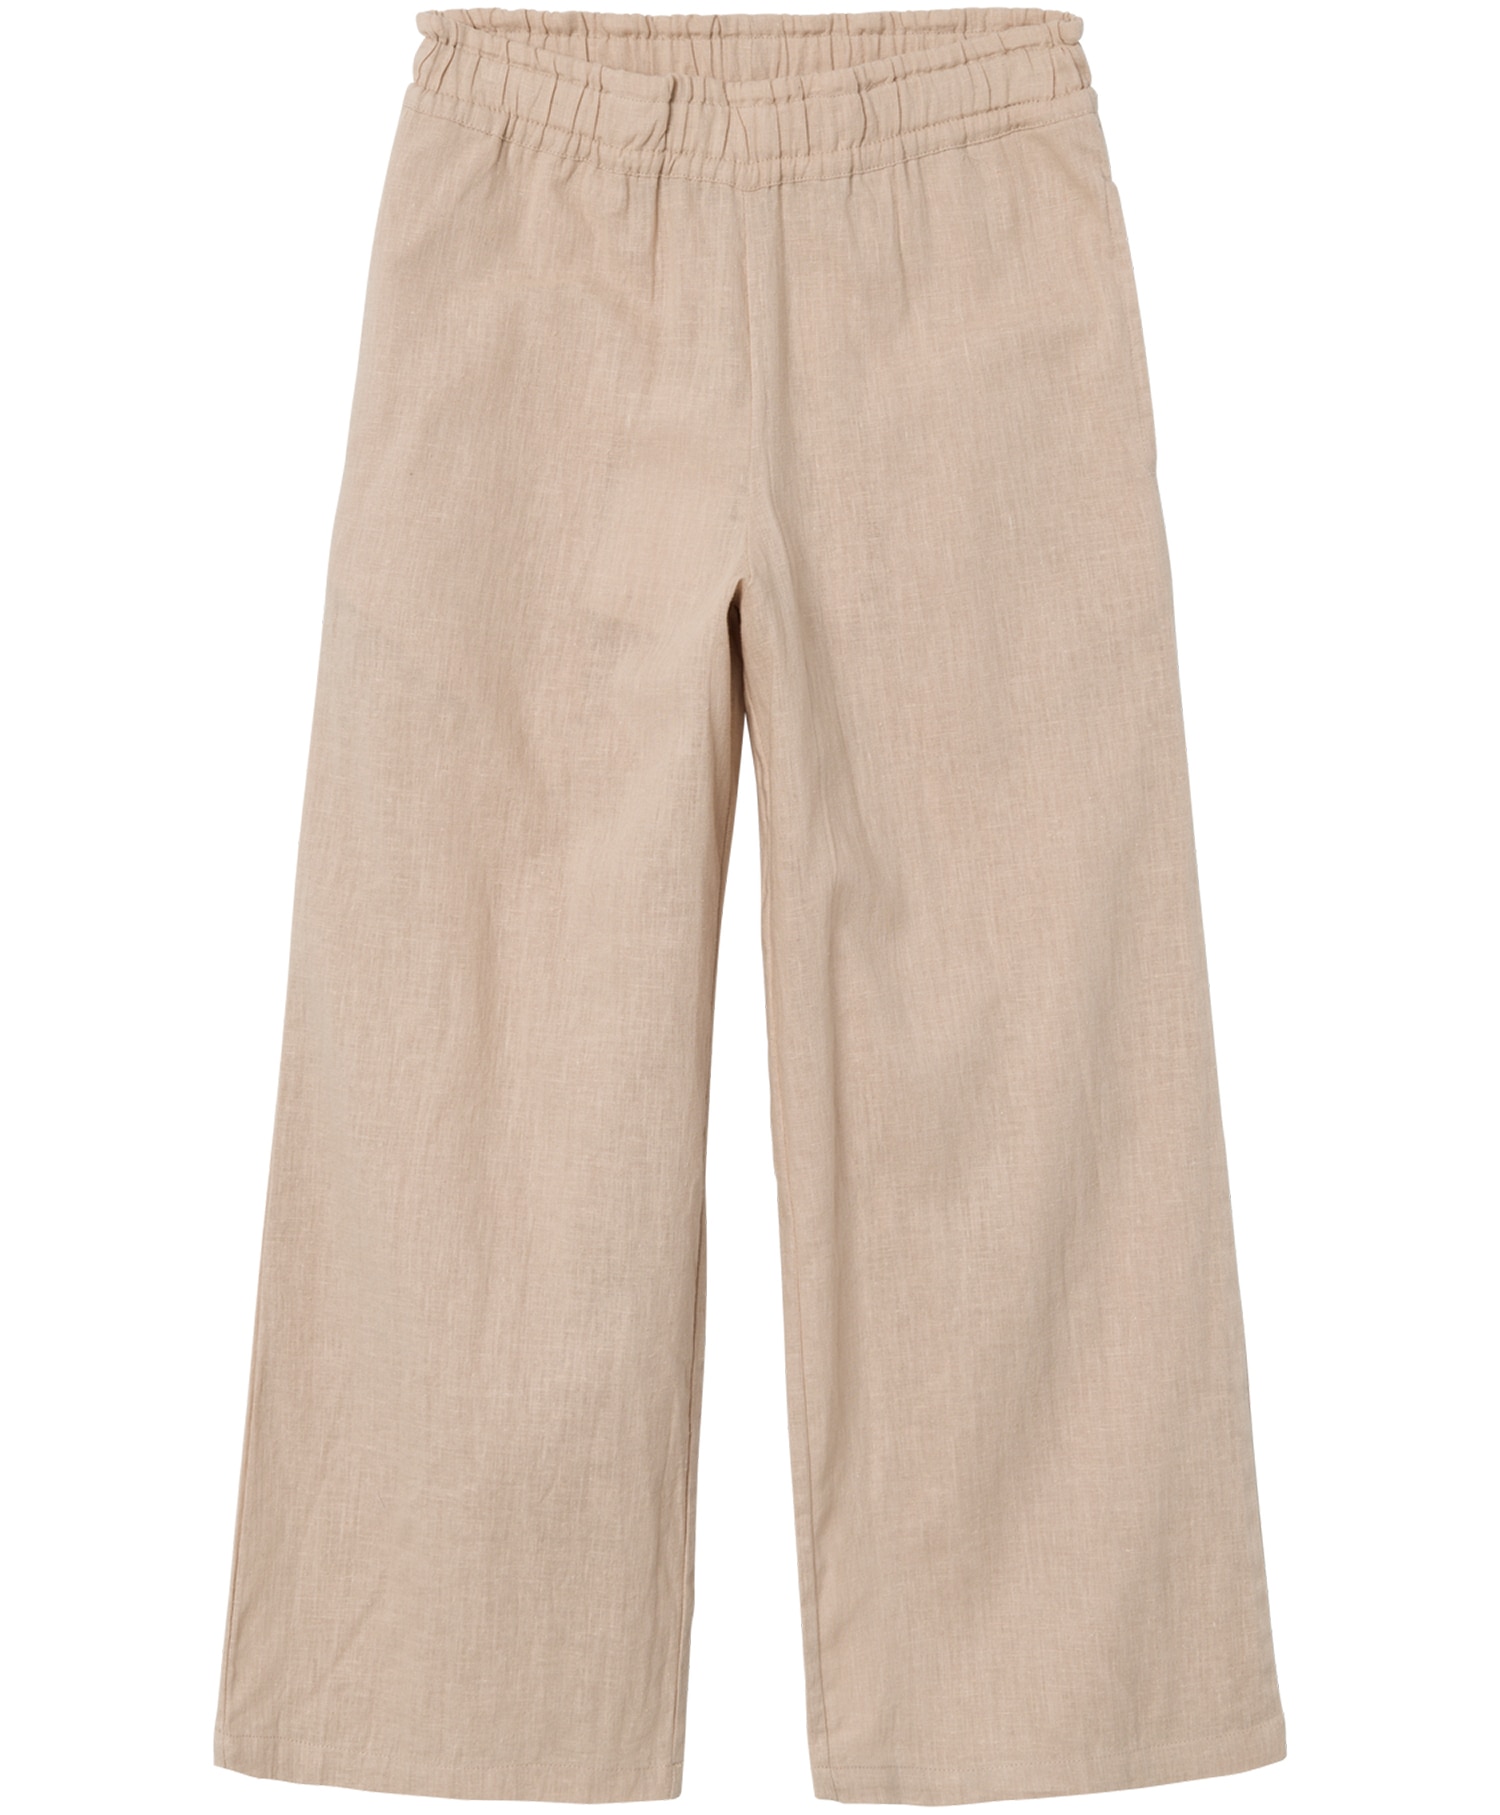 Name it Falinnen Wide pant